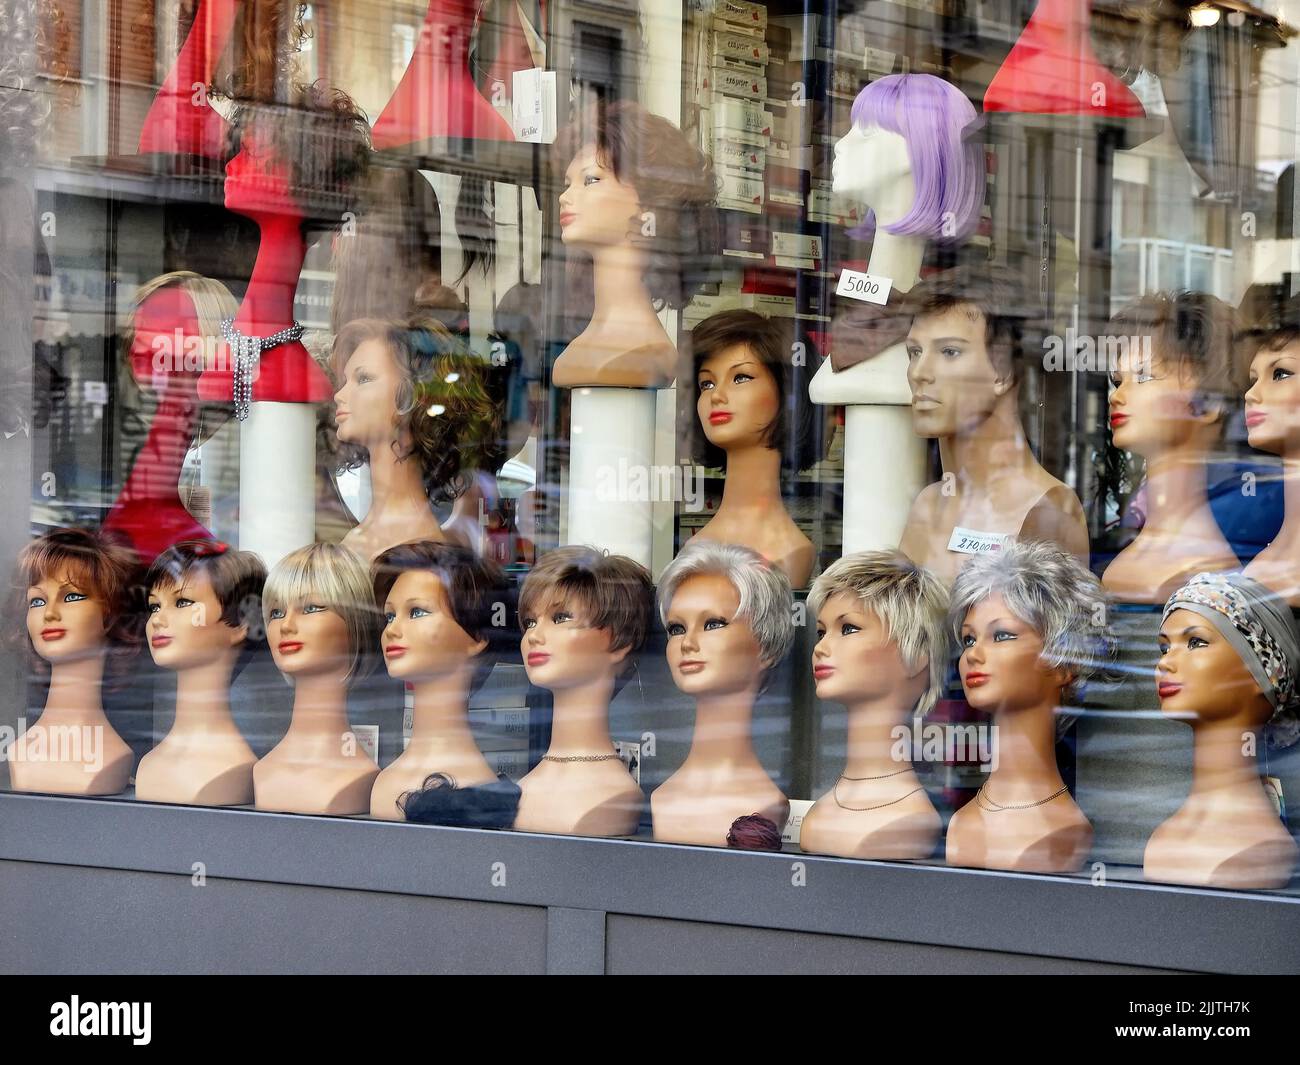 A beautiful shot of a wigs shop window with different types of wigs Stock Photo